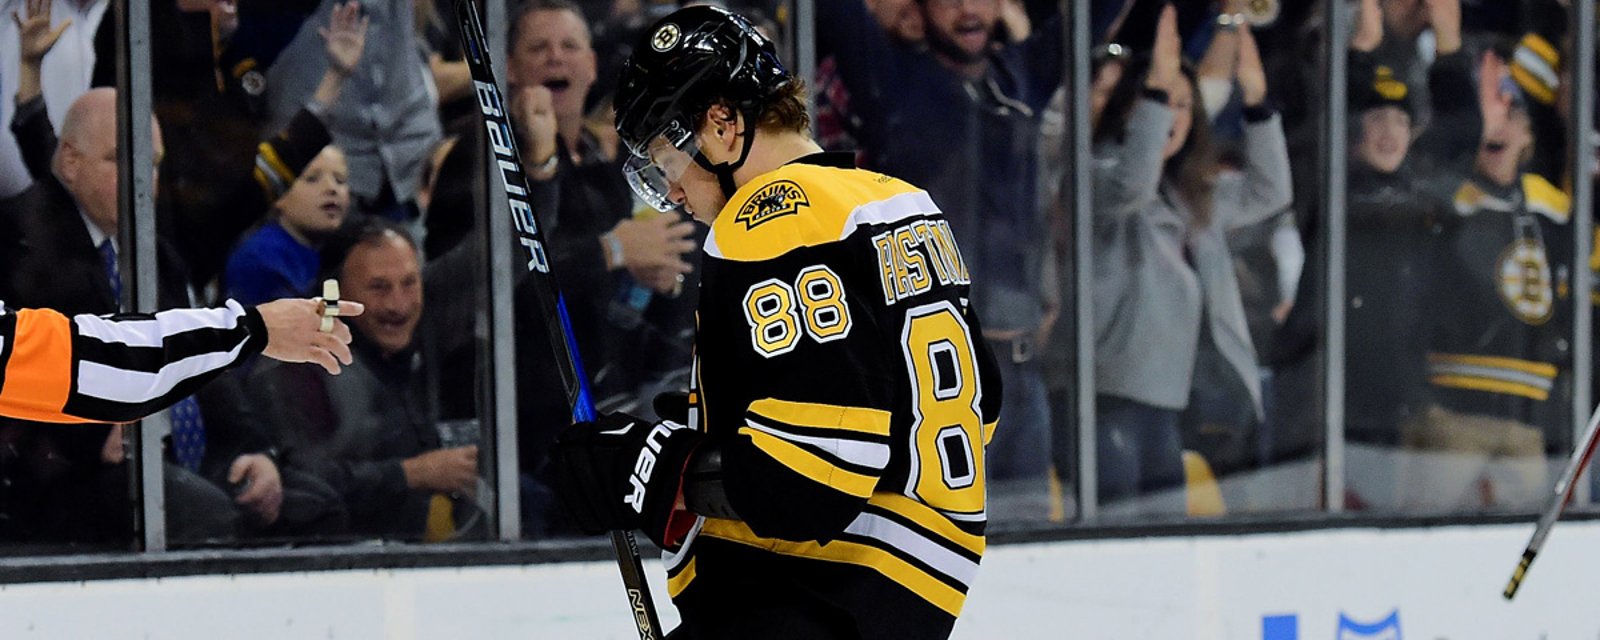 Must see : Pastrnak stood up for coach Cassidy with 2PP goals!